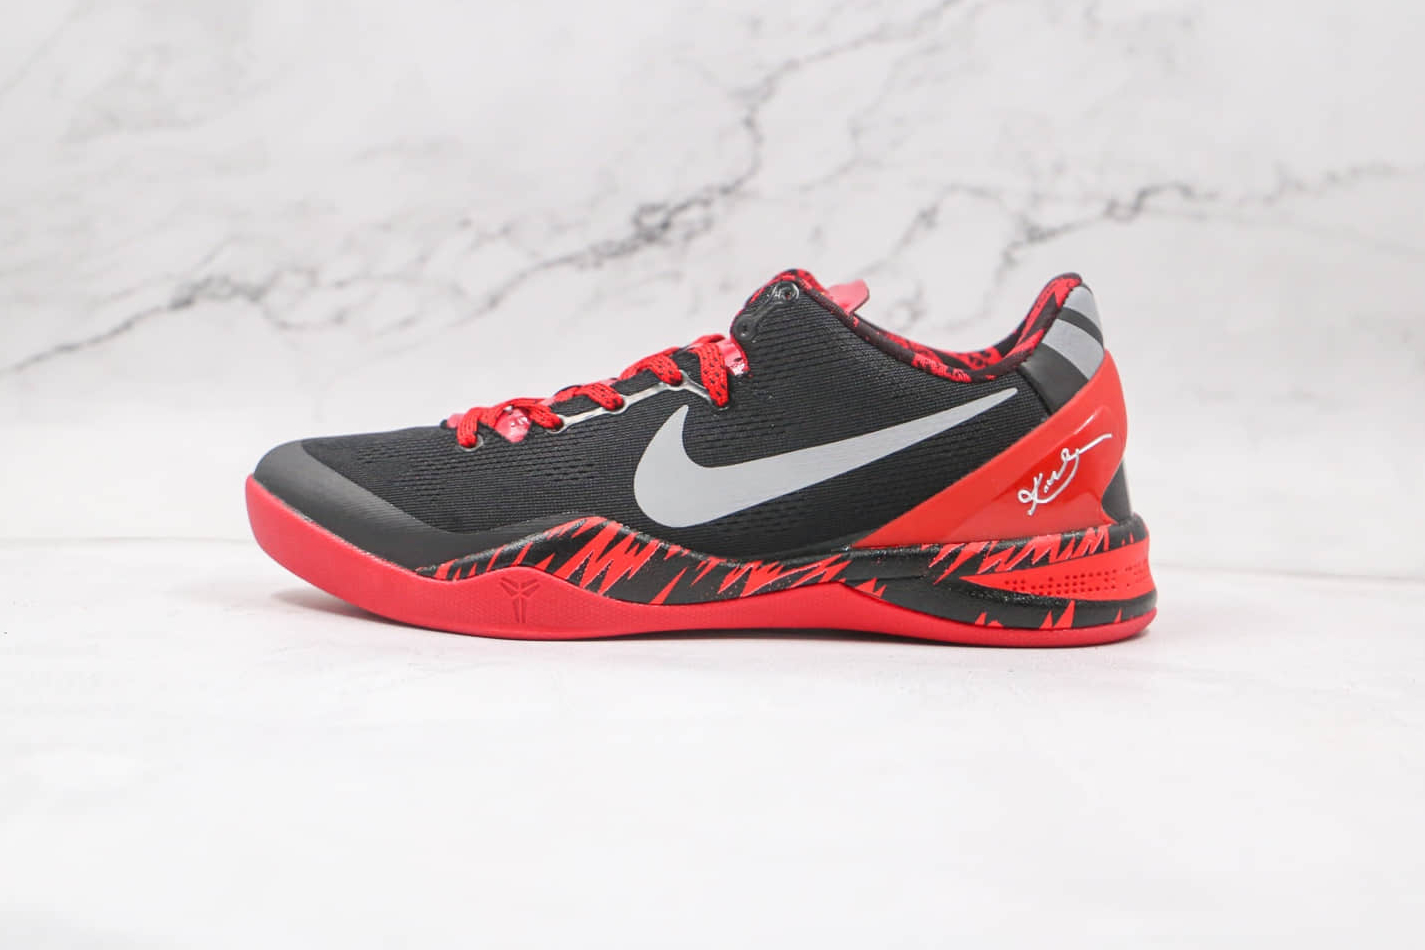 Nike Kobe 8 System Philippines Pack Gym Red 613959-002 - Shop Now!